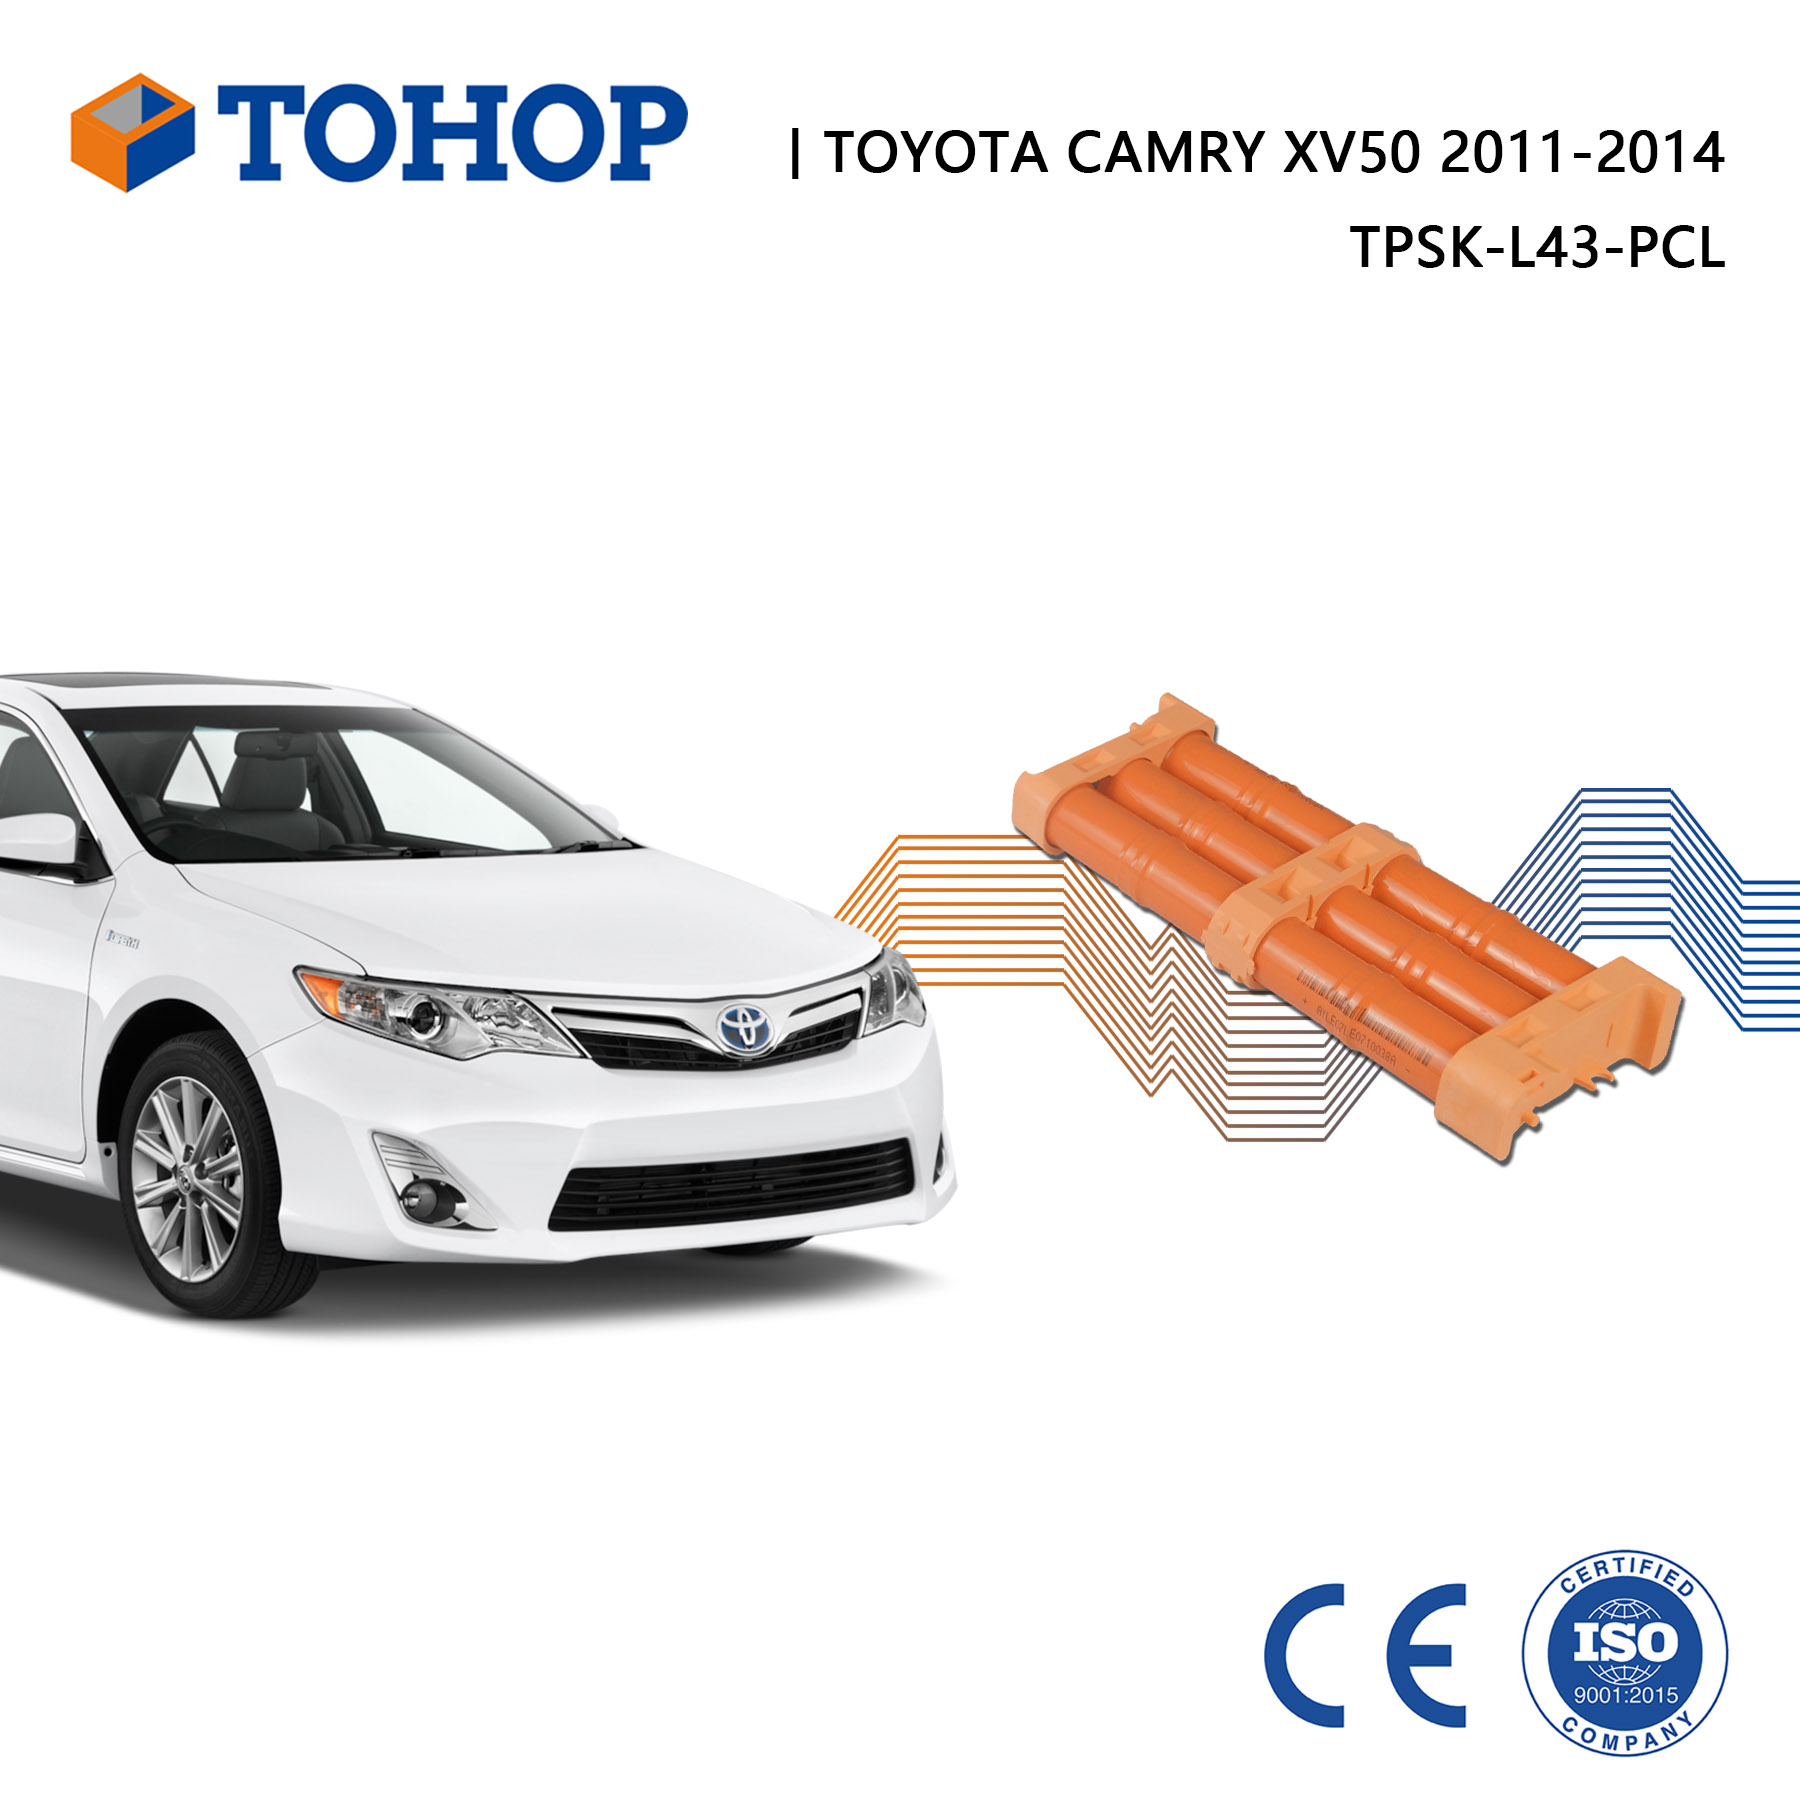 Toyota Camry XV50 Hybrid Battery Pack 2012-2016 Remplacement NOUVEAU NIMH Cell 14.4V 6.5AH